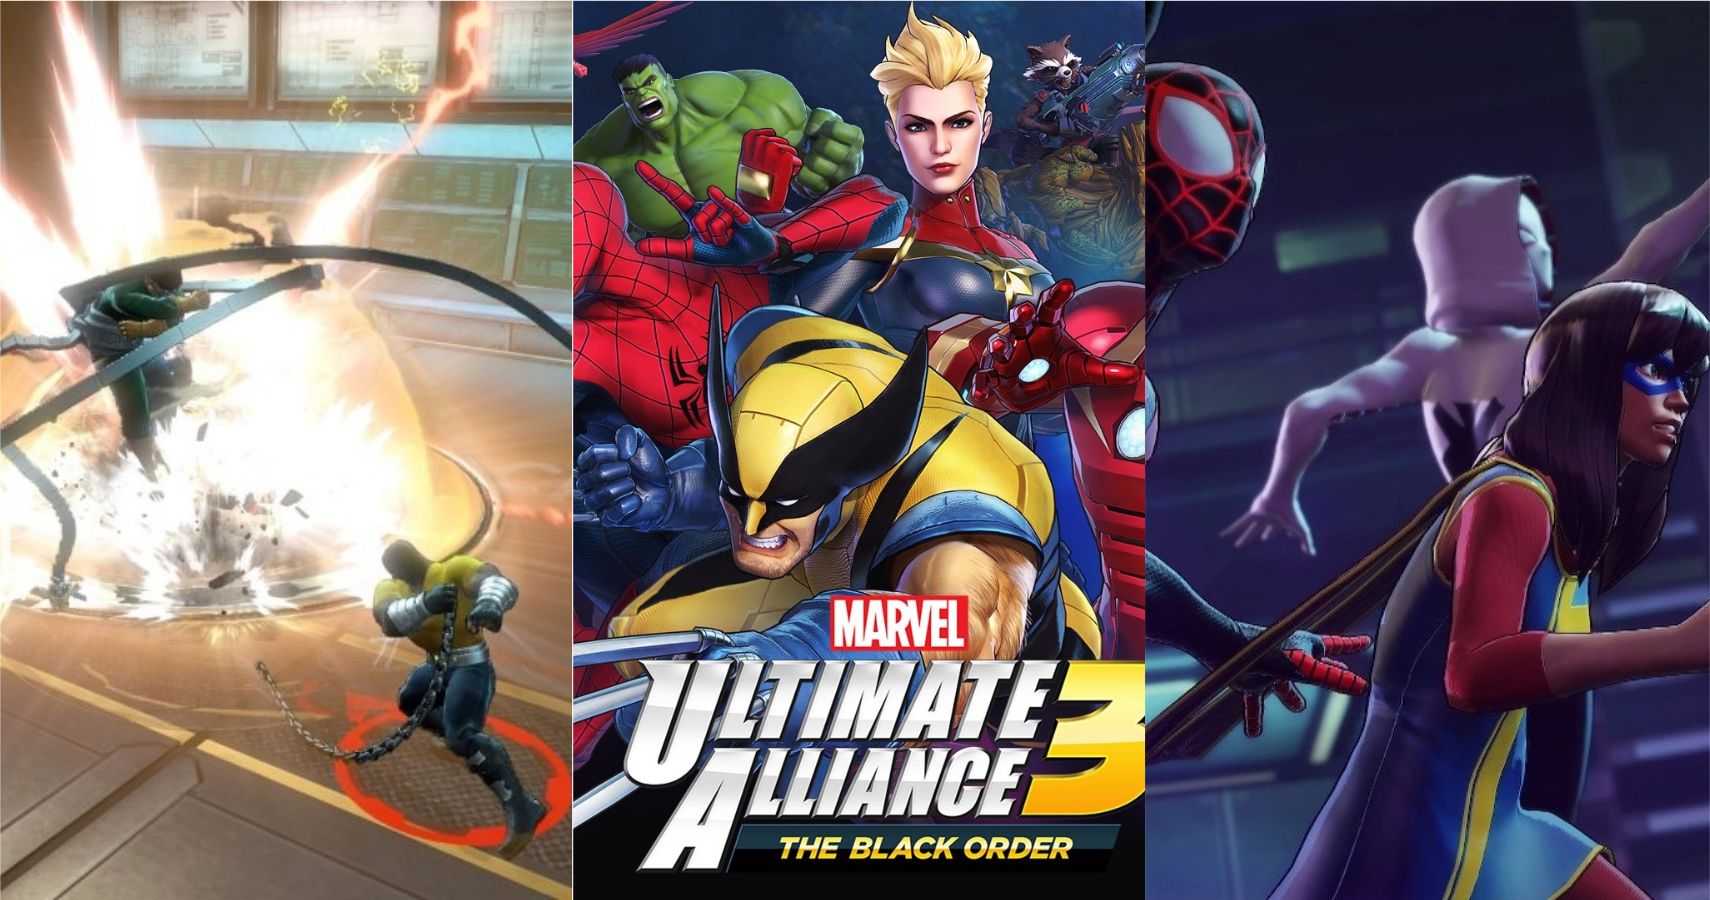 Marvel Ultimate Alliance 3 Synergy Attacks Split Feature